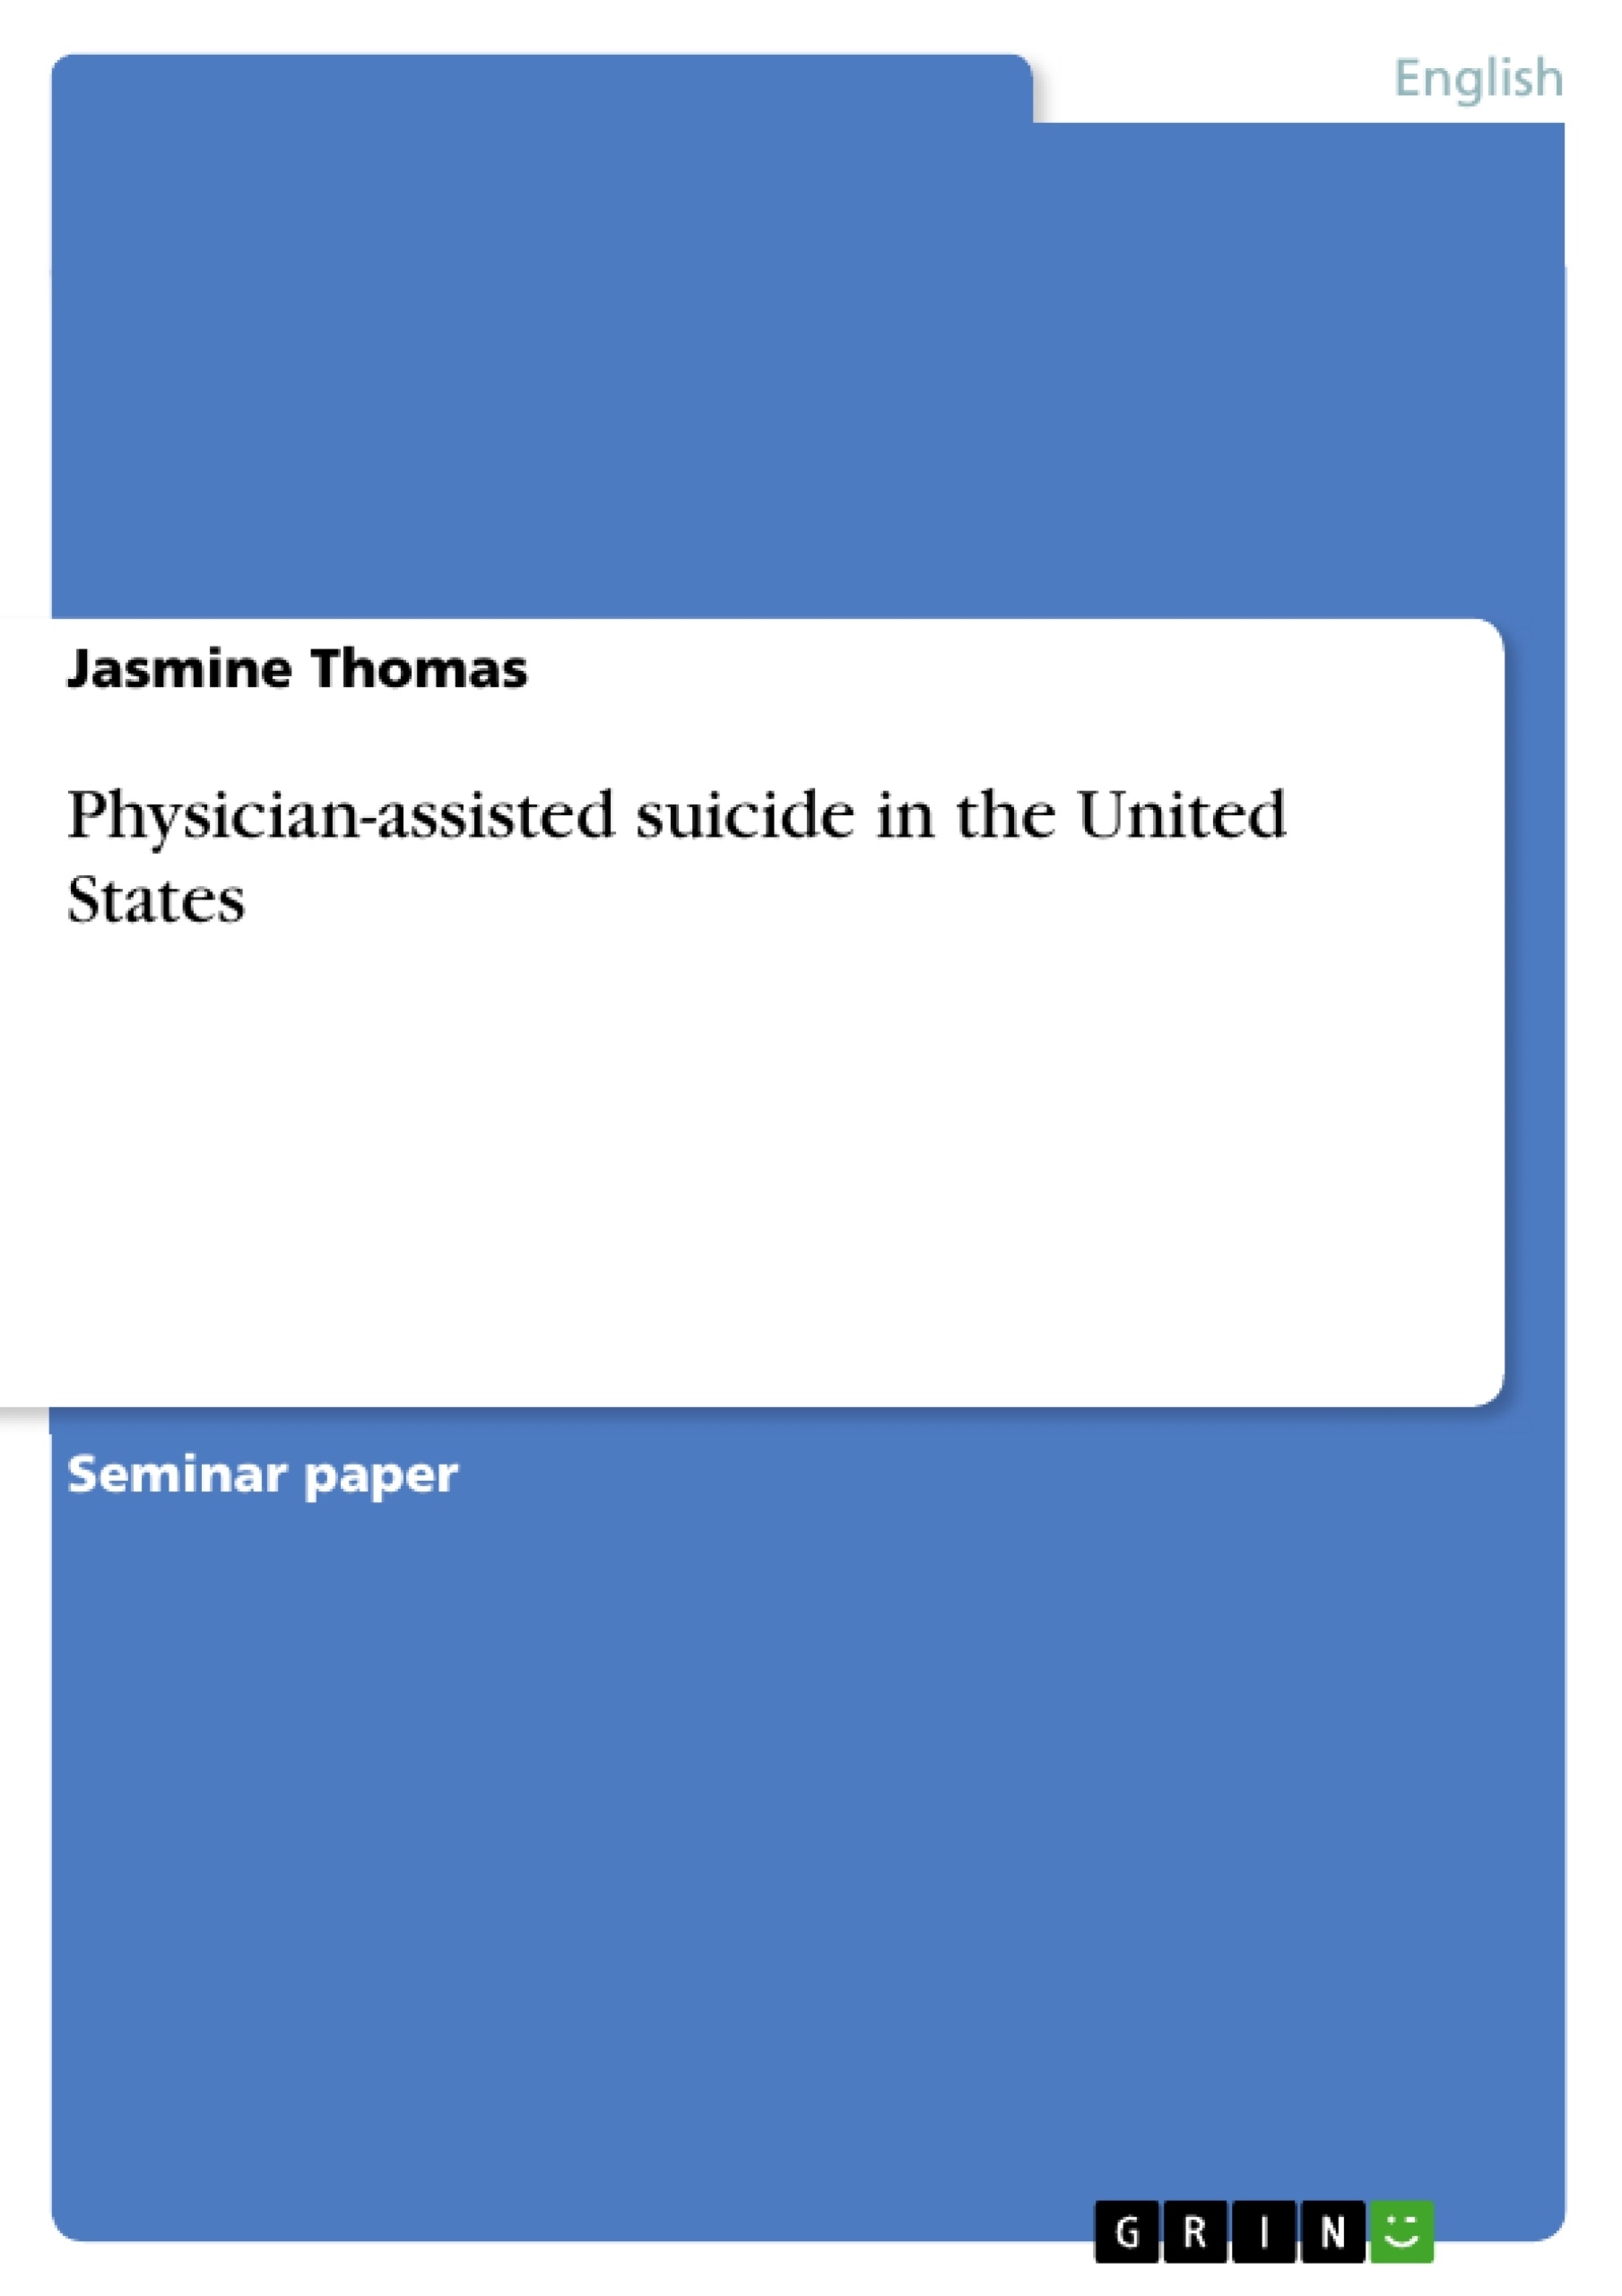 Title: Physician-assisted suicide in the United States